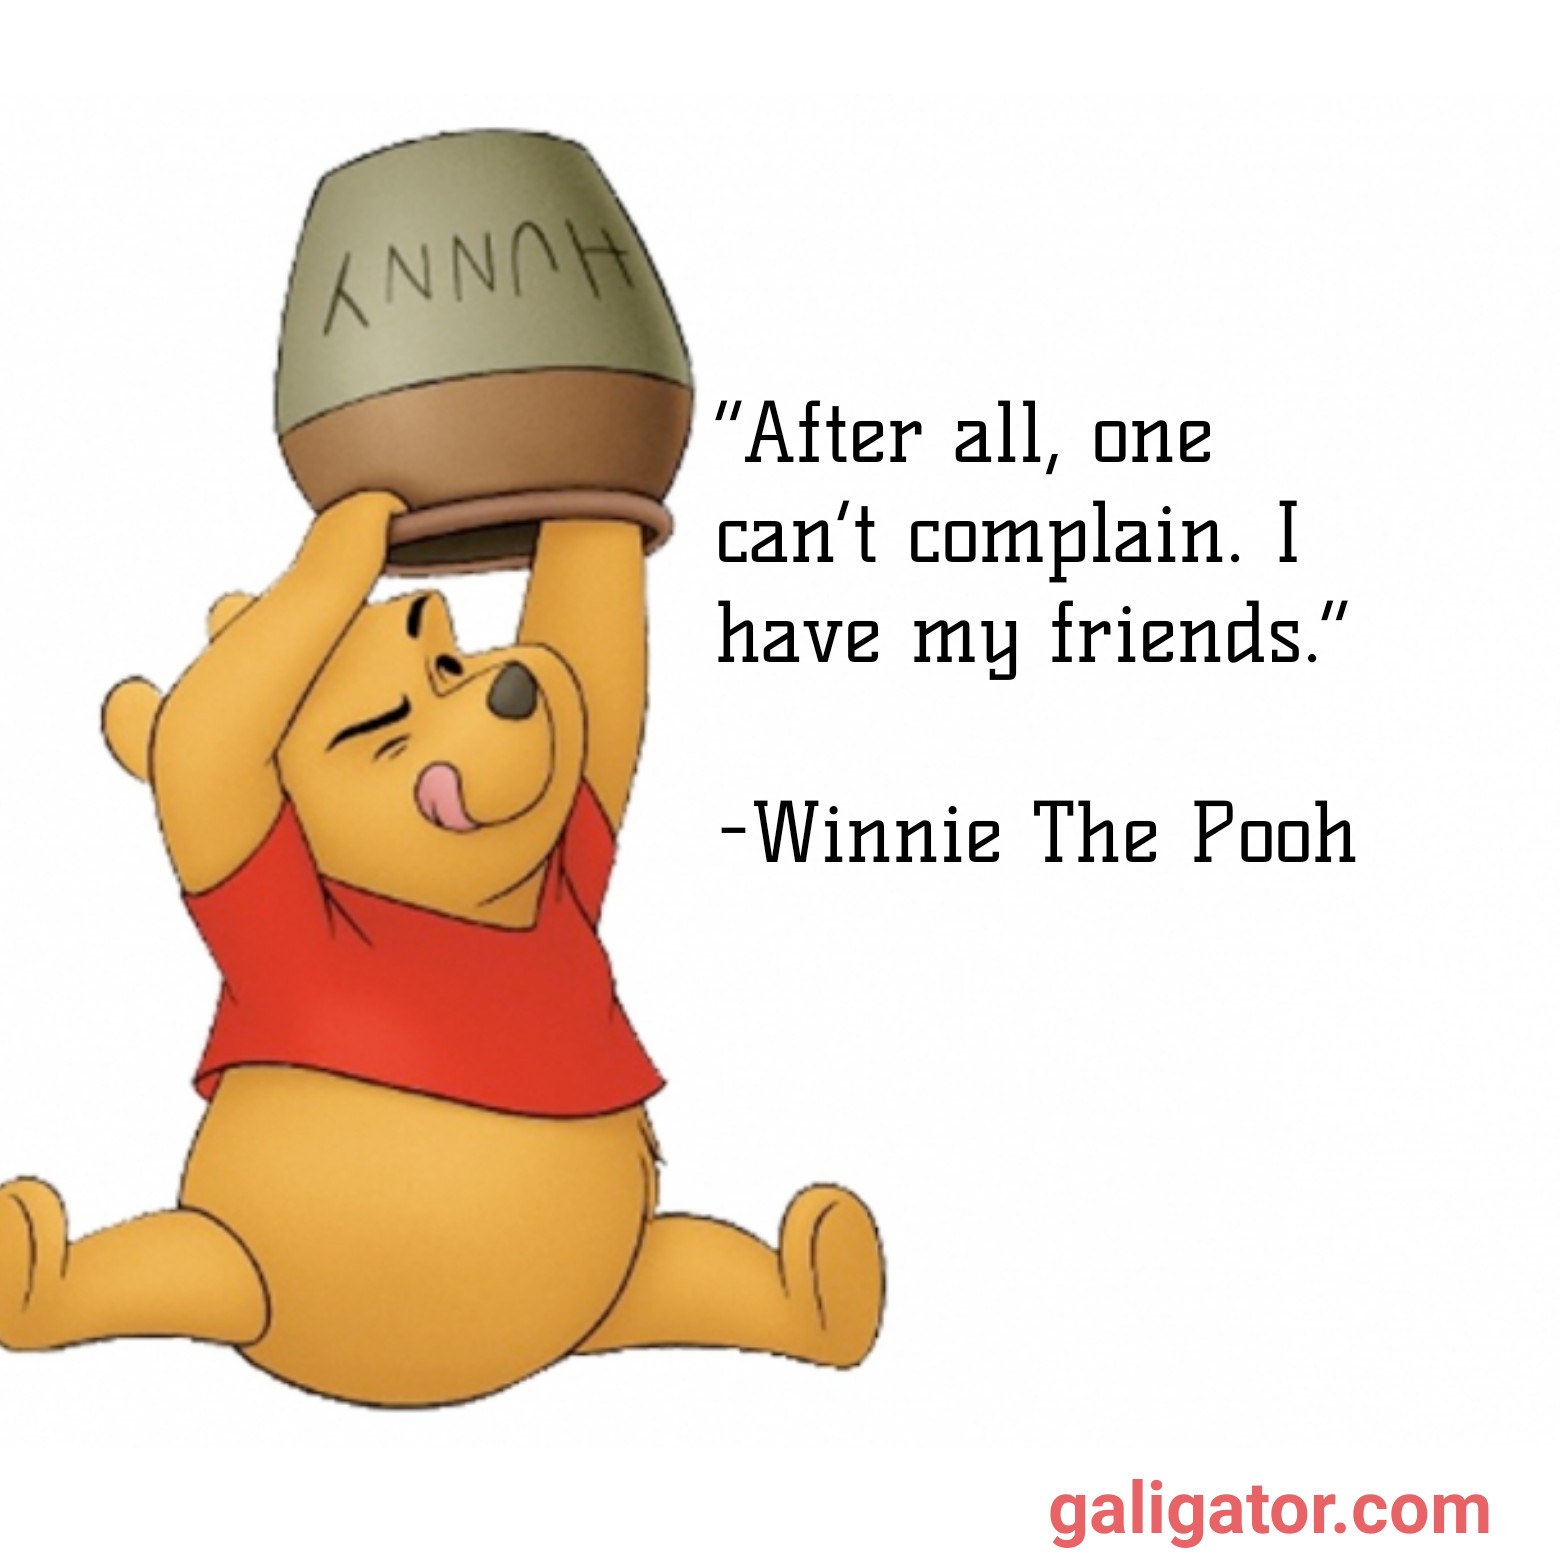 winnie the pooh quotes, winnie the pooh friendship quotes , winnie the pooh love quotes , inspirational winnie the pooh quotes , winnie the pooh birthday quotes , winnie the pooh blustery day quote,  winnie the pooh birthday quotes, winnie the pooh quotes funny, winnie the pooh graduation quotes, winnie the pooh quotes they say nothing is impossible